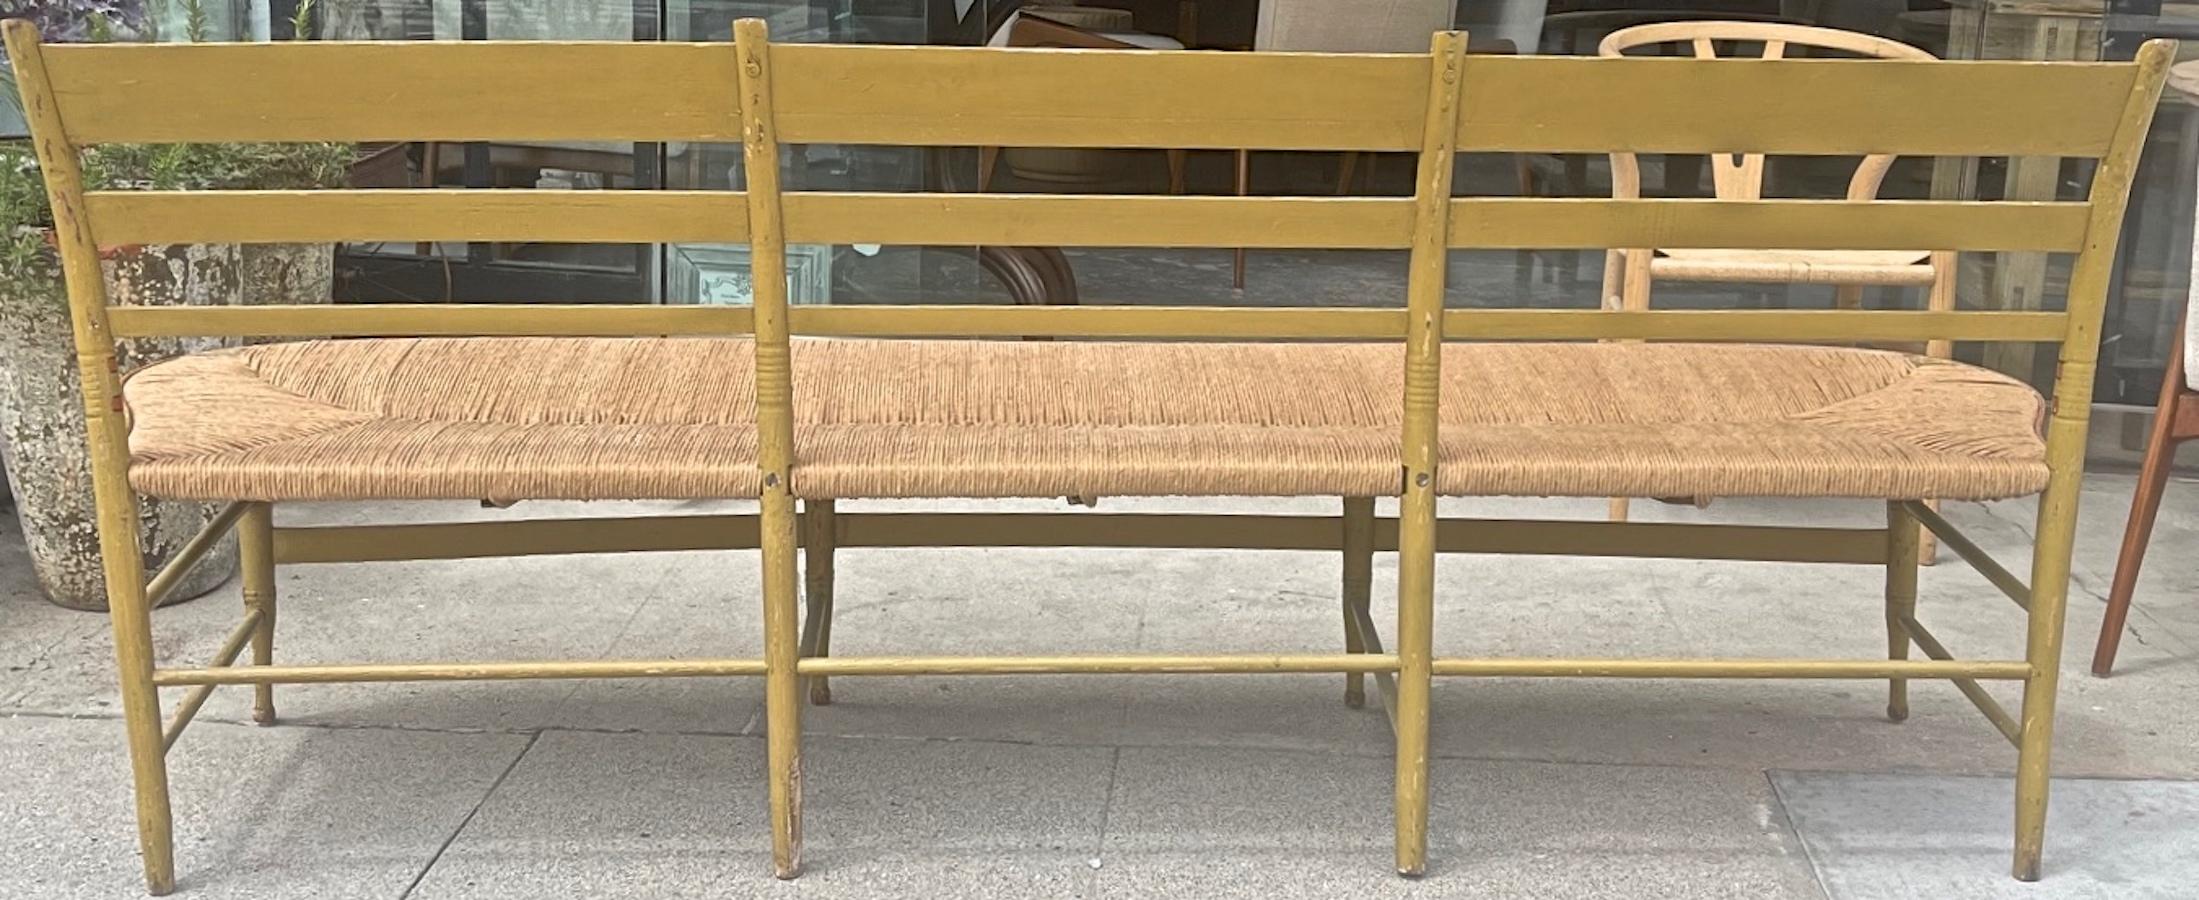 This is a fine example of a typical 3 seat rush bench from the 19th Century from the Provençe area of Southern France. The paint work is original and the rush has been newly rewoven.